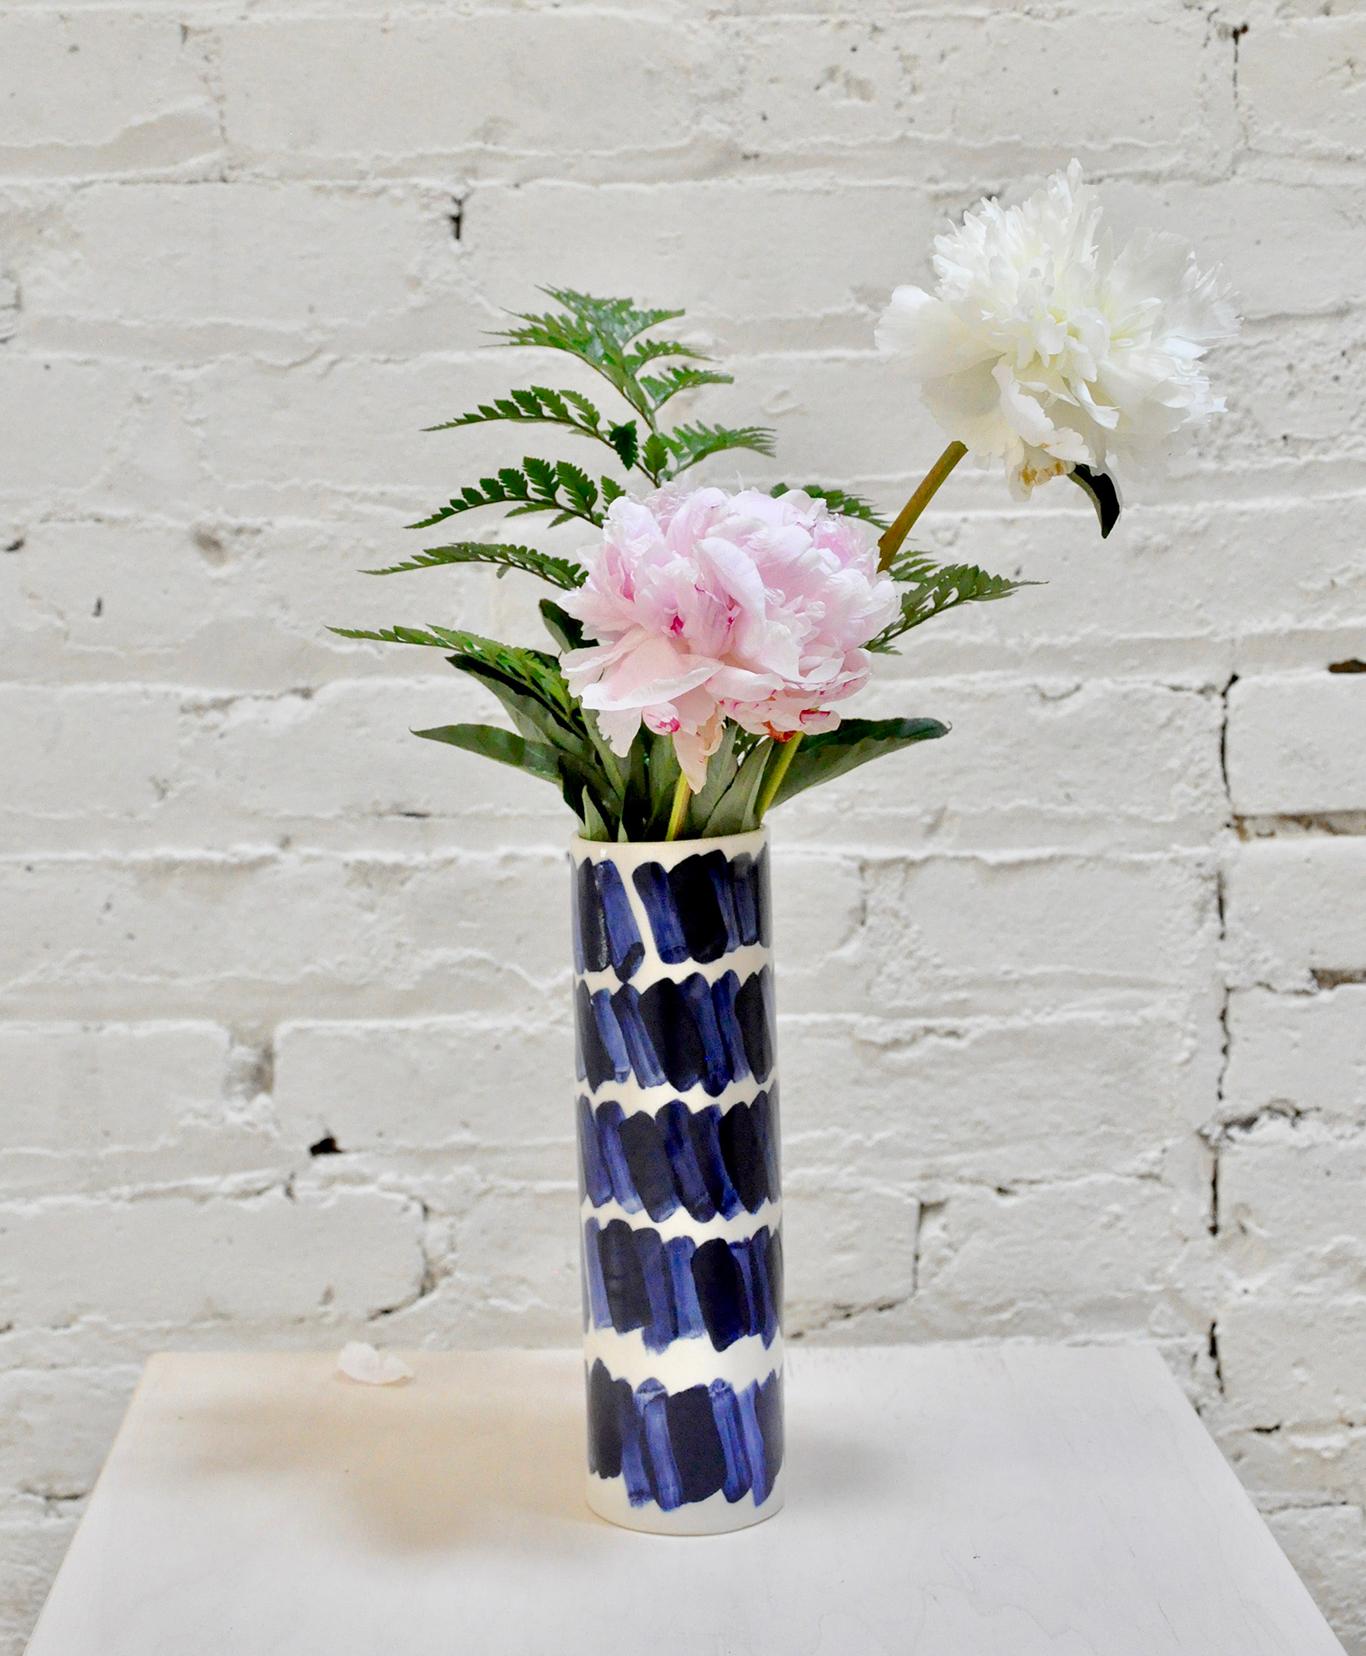 Hand-built vase by Isabel Halley, in creamy white porcelain with striking cobalt glaze brush strokes.

Dimensions: 8